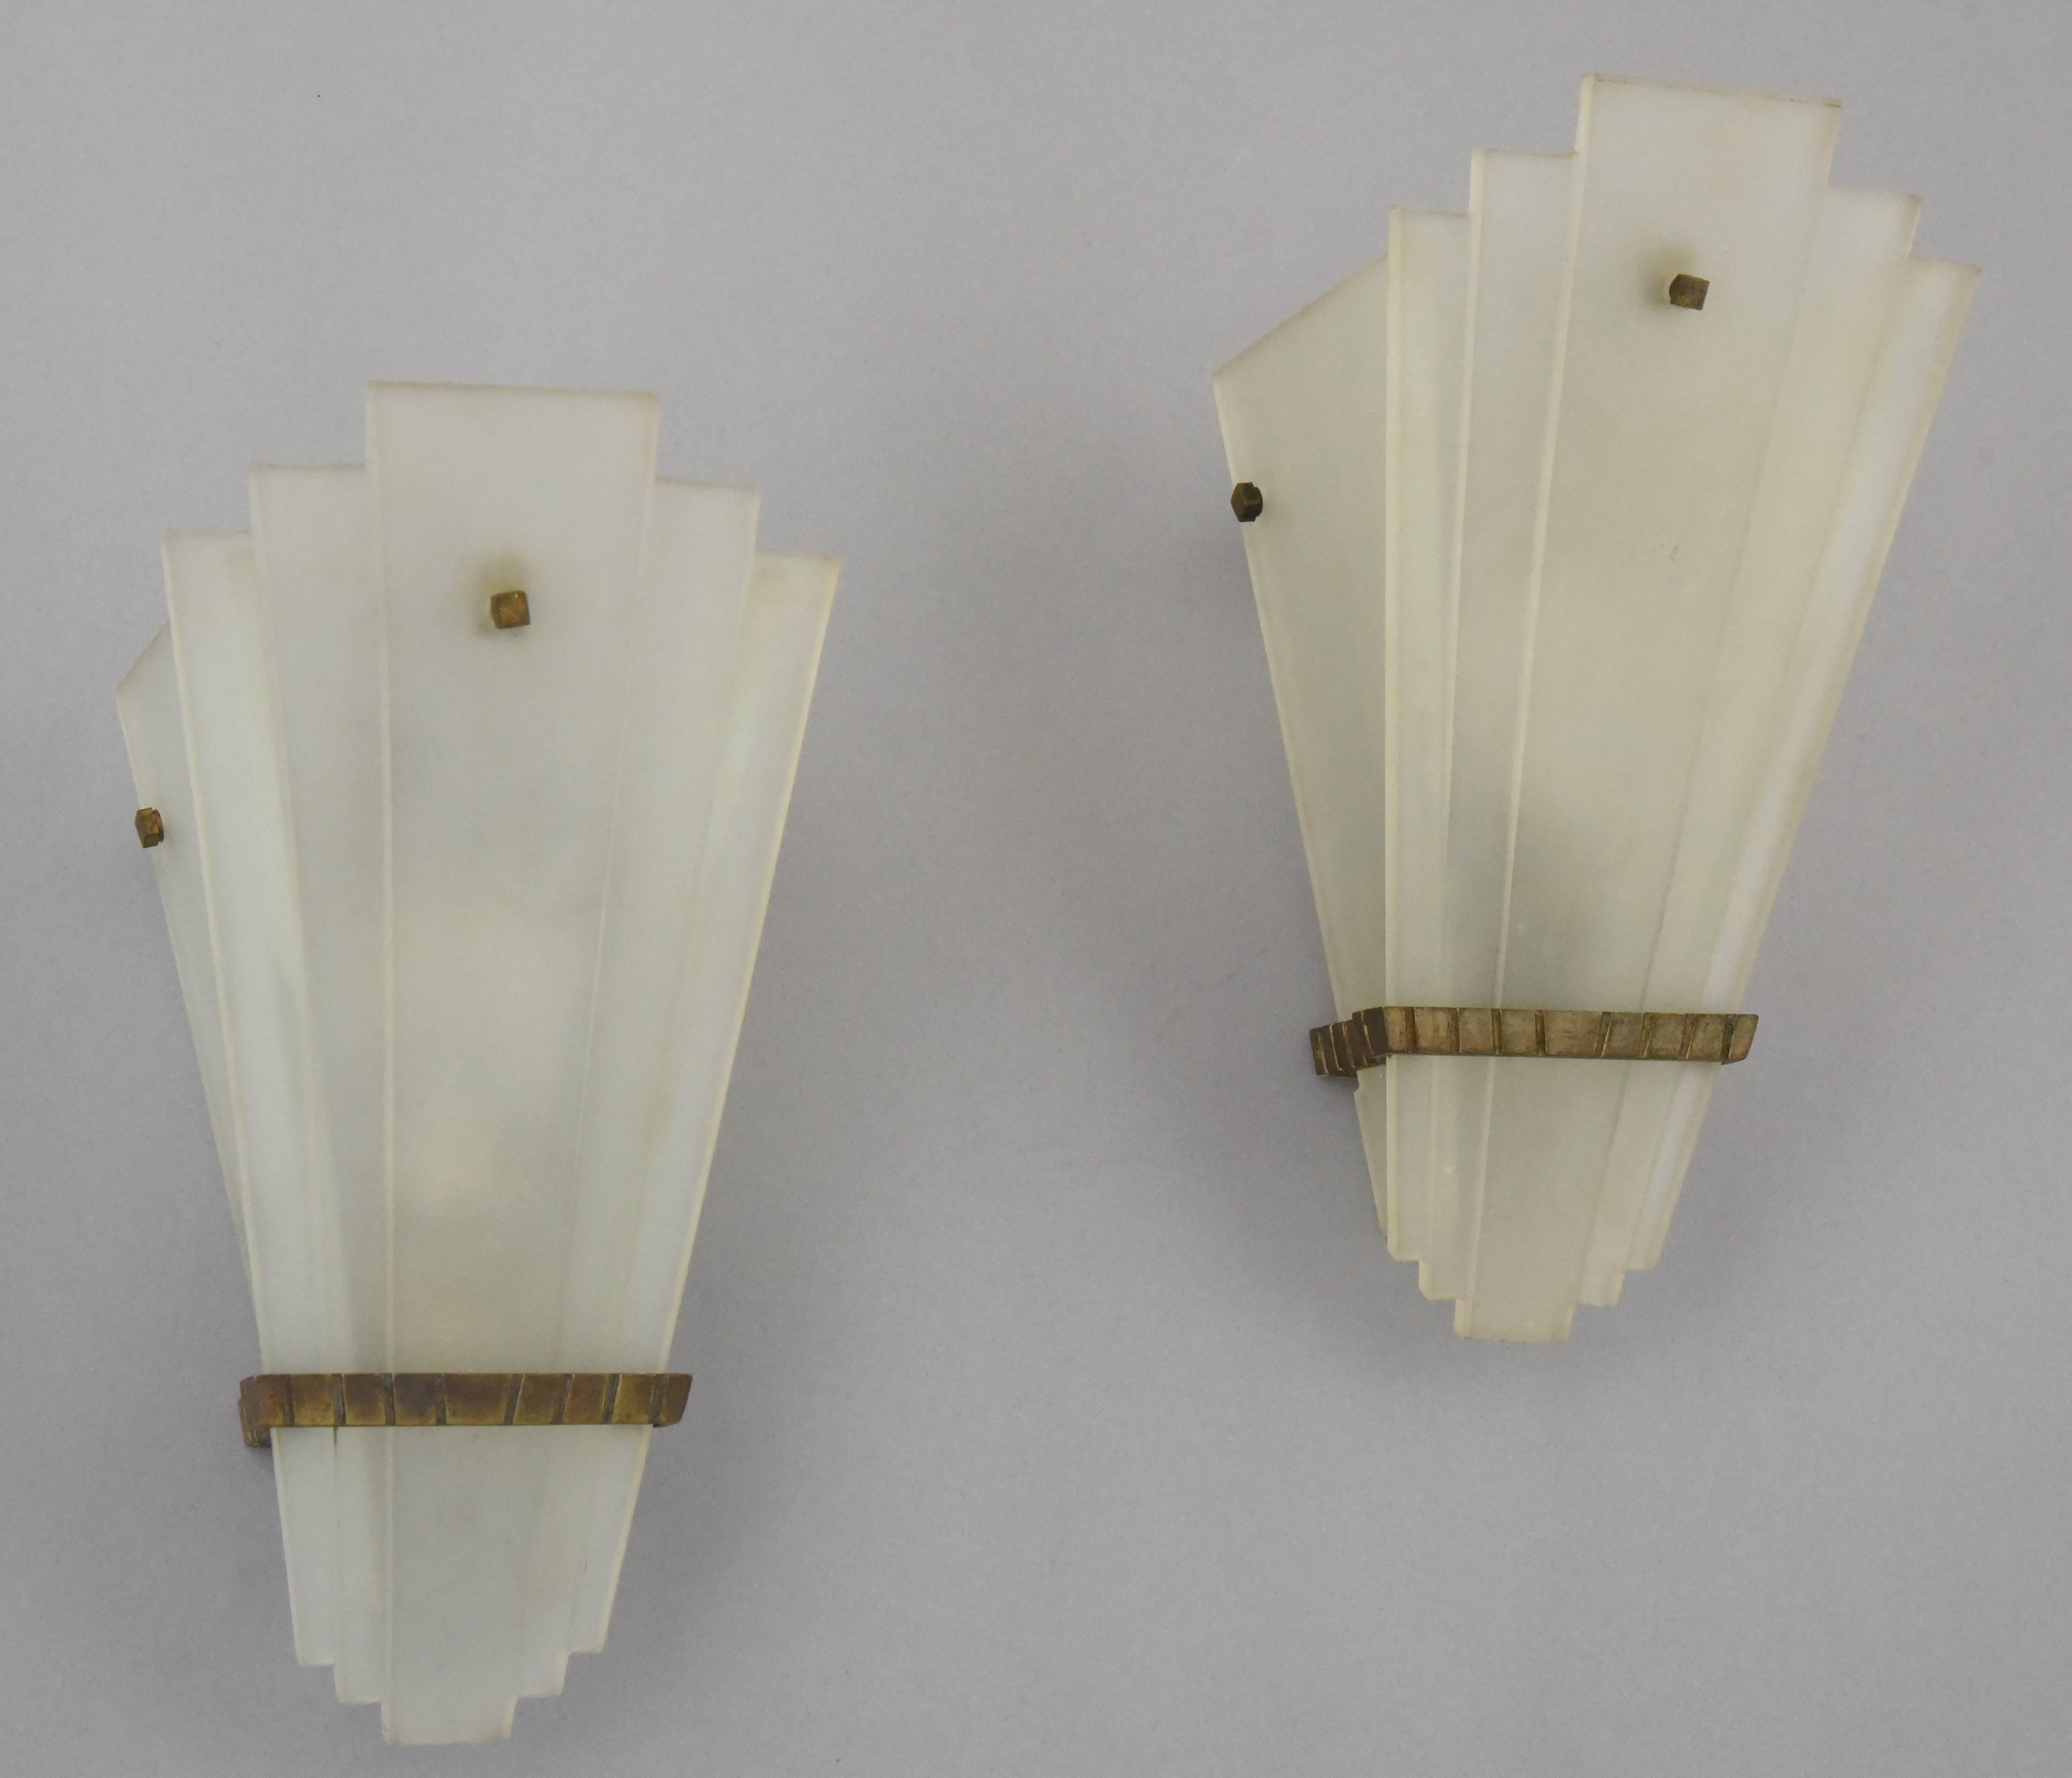 A pair of very good quality Art Deco glass and bronze wall lights or sconces in frosted glass and bronze made in France, 1920-1930.
Material: Frosted glass. Bronze. Metal fixture.
Origin: France
Size: H 25 cm x L 13.5 cm x W 12 / 6 cm.
H 9.8